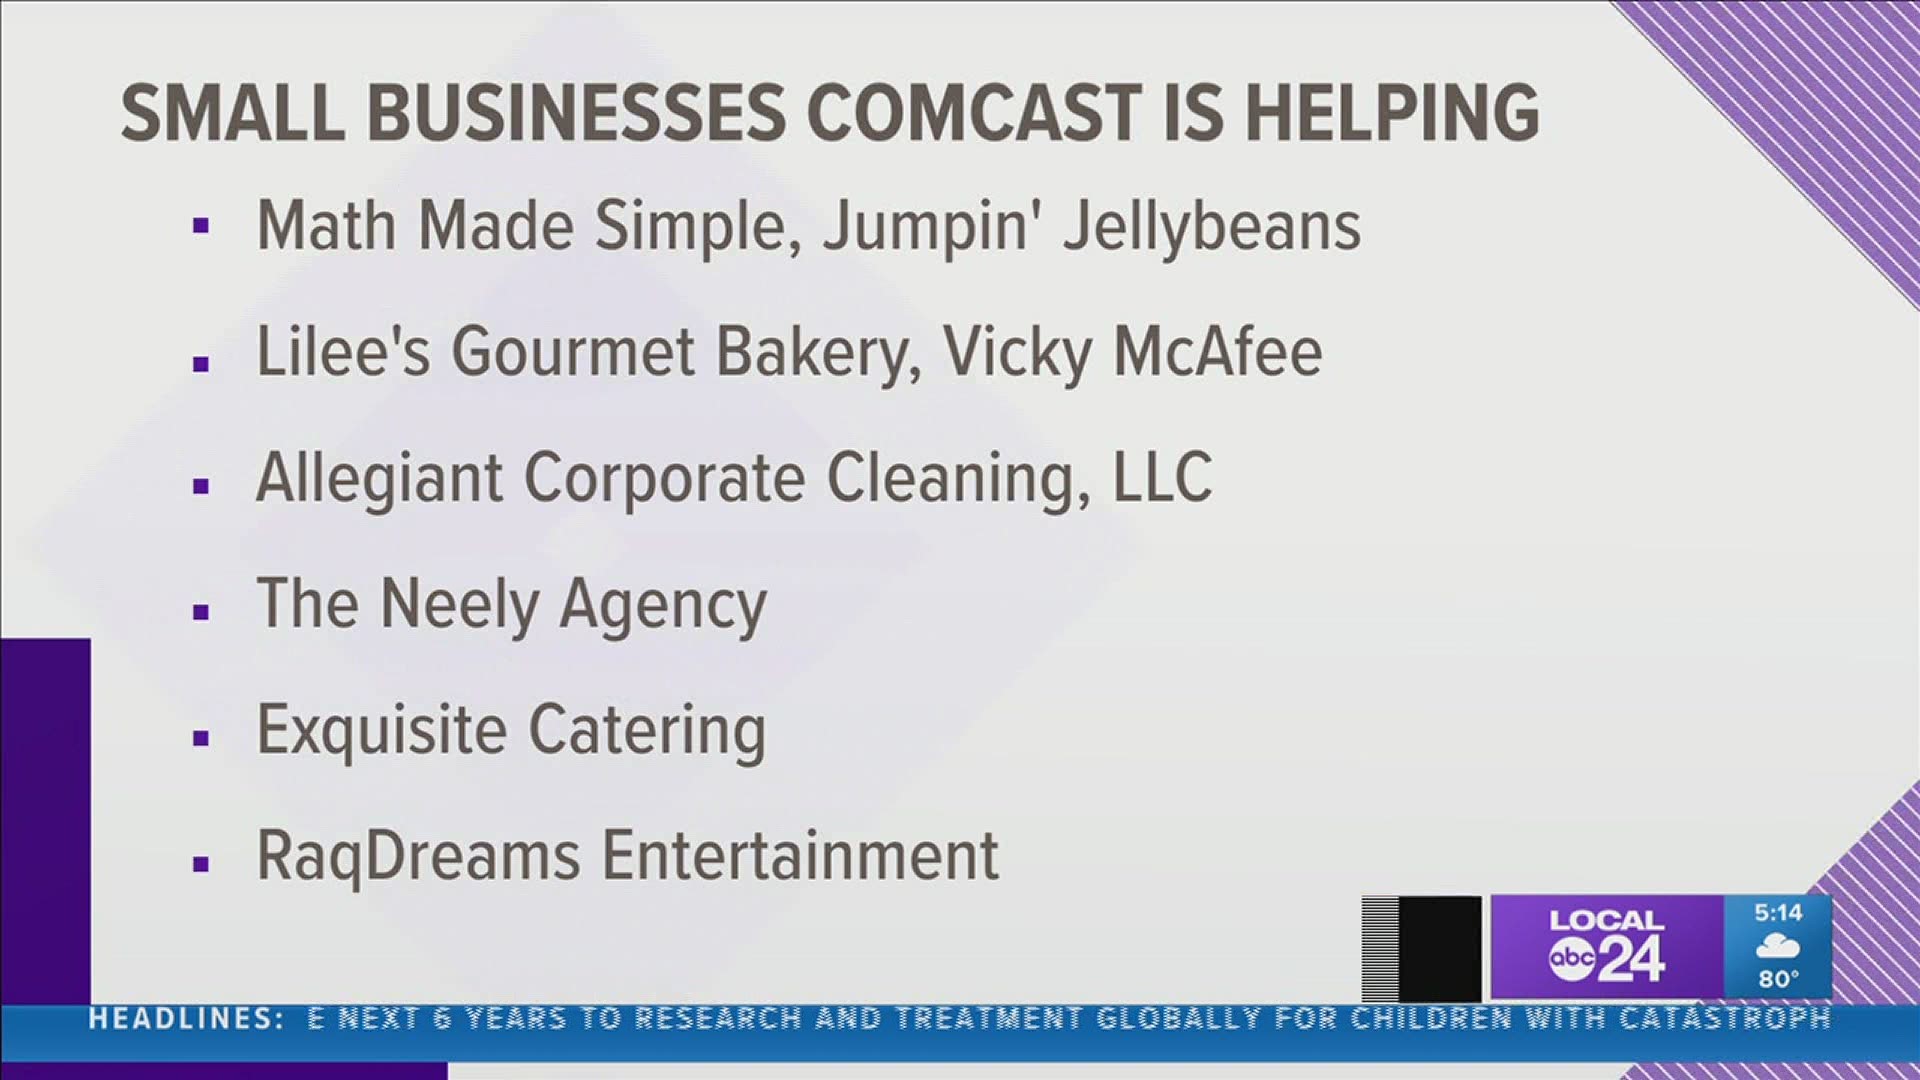 It's all part of the company's Comcast Rise program helping small businesses across the U.S.